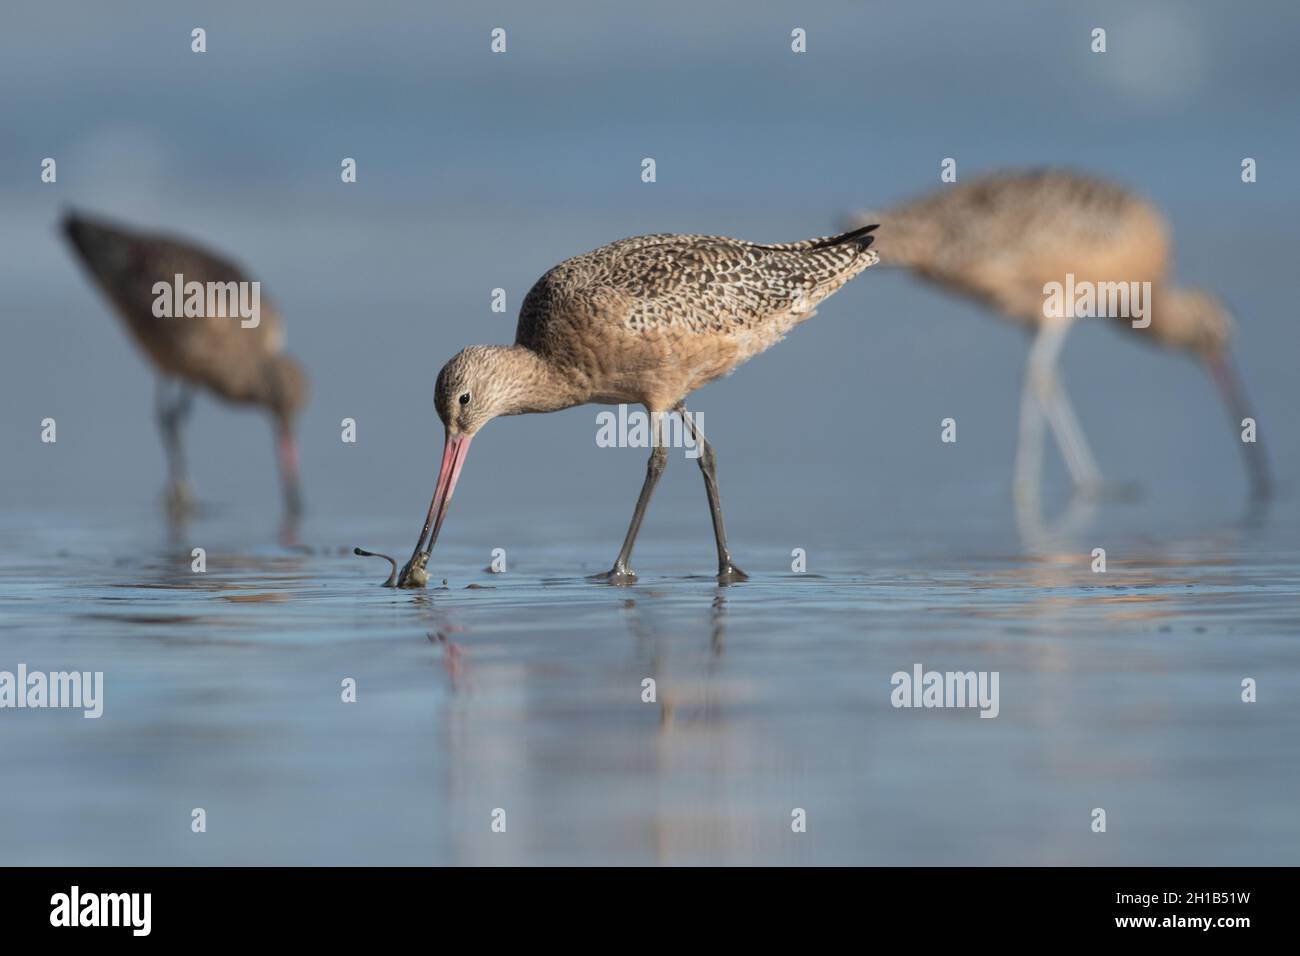 Marbled godwit (Limosa fedoa) foraging for food on a West Coast beach in Point Reyes National Seashore in Marin county, California. Stock Photo